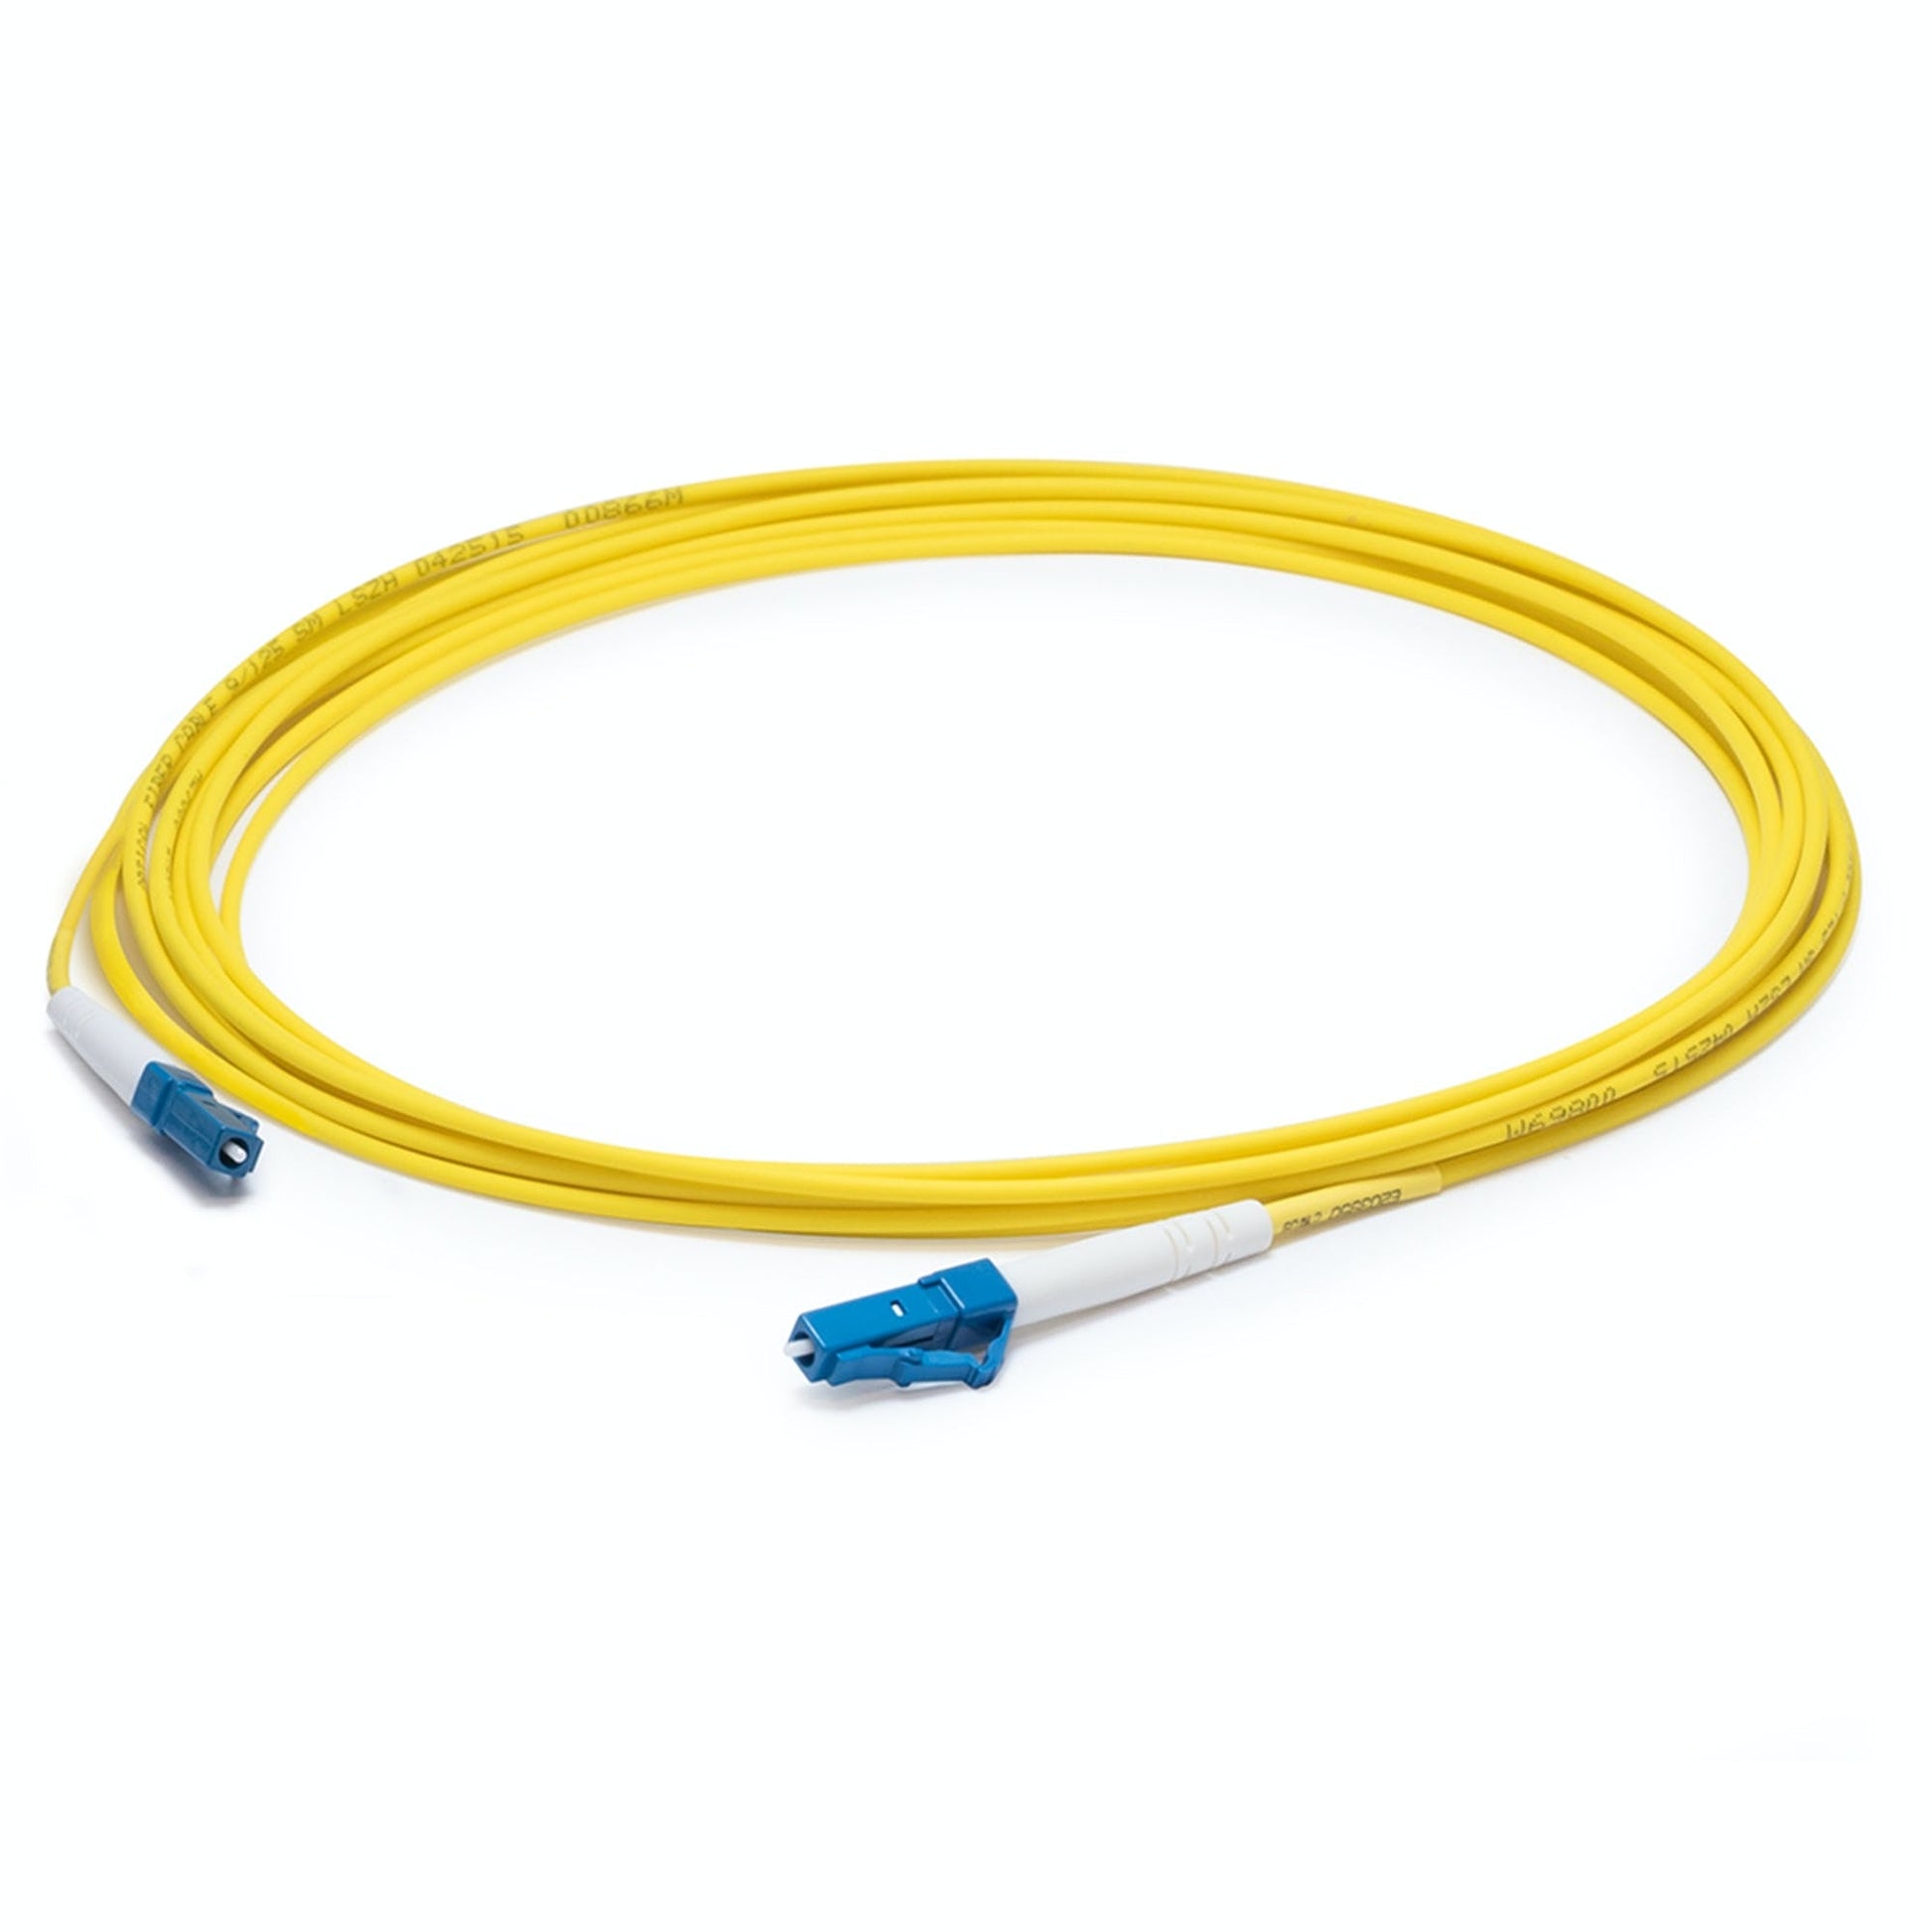 Addon Networks Add-Lc-Lc-2Ms9Smfp Fibre Optic Cable 2 M Ofnp Os2 Yellow